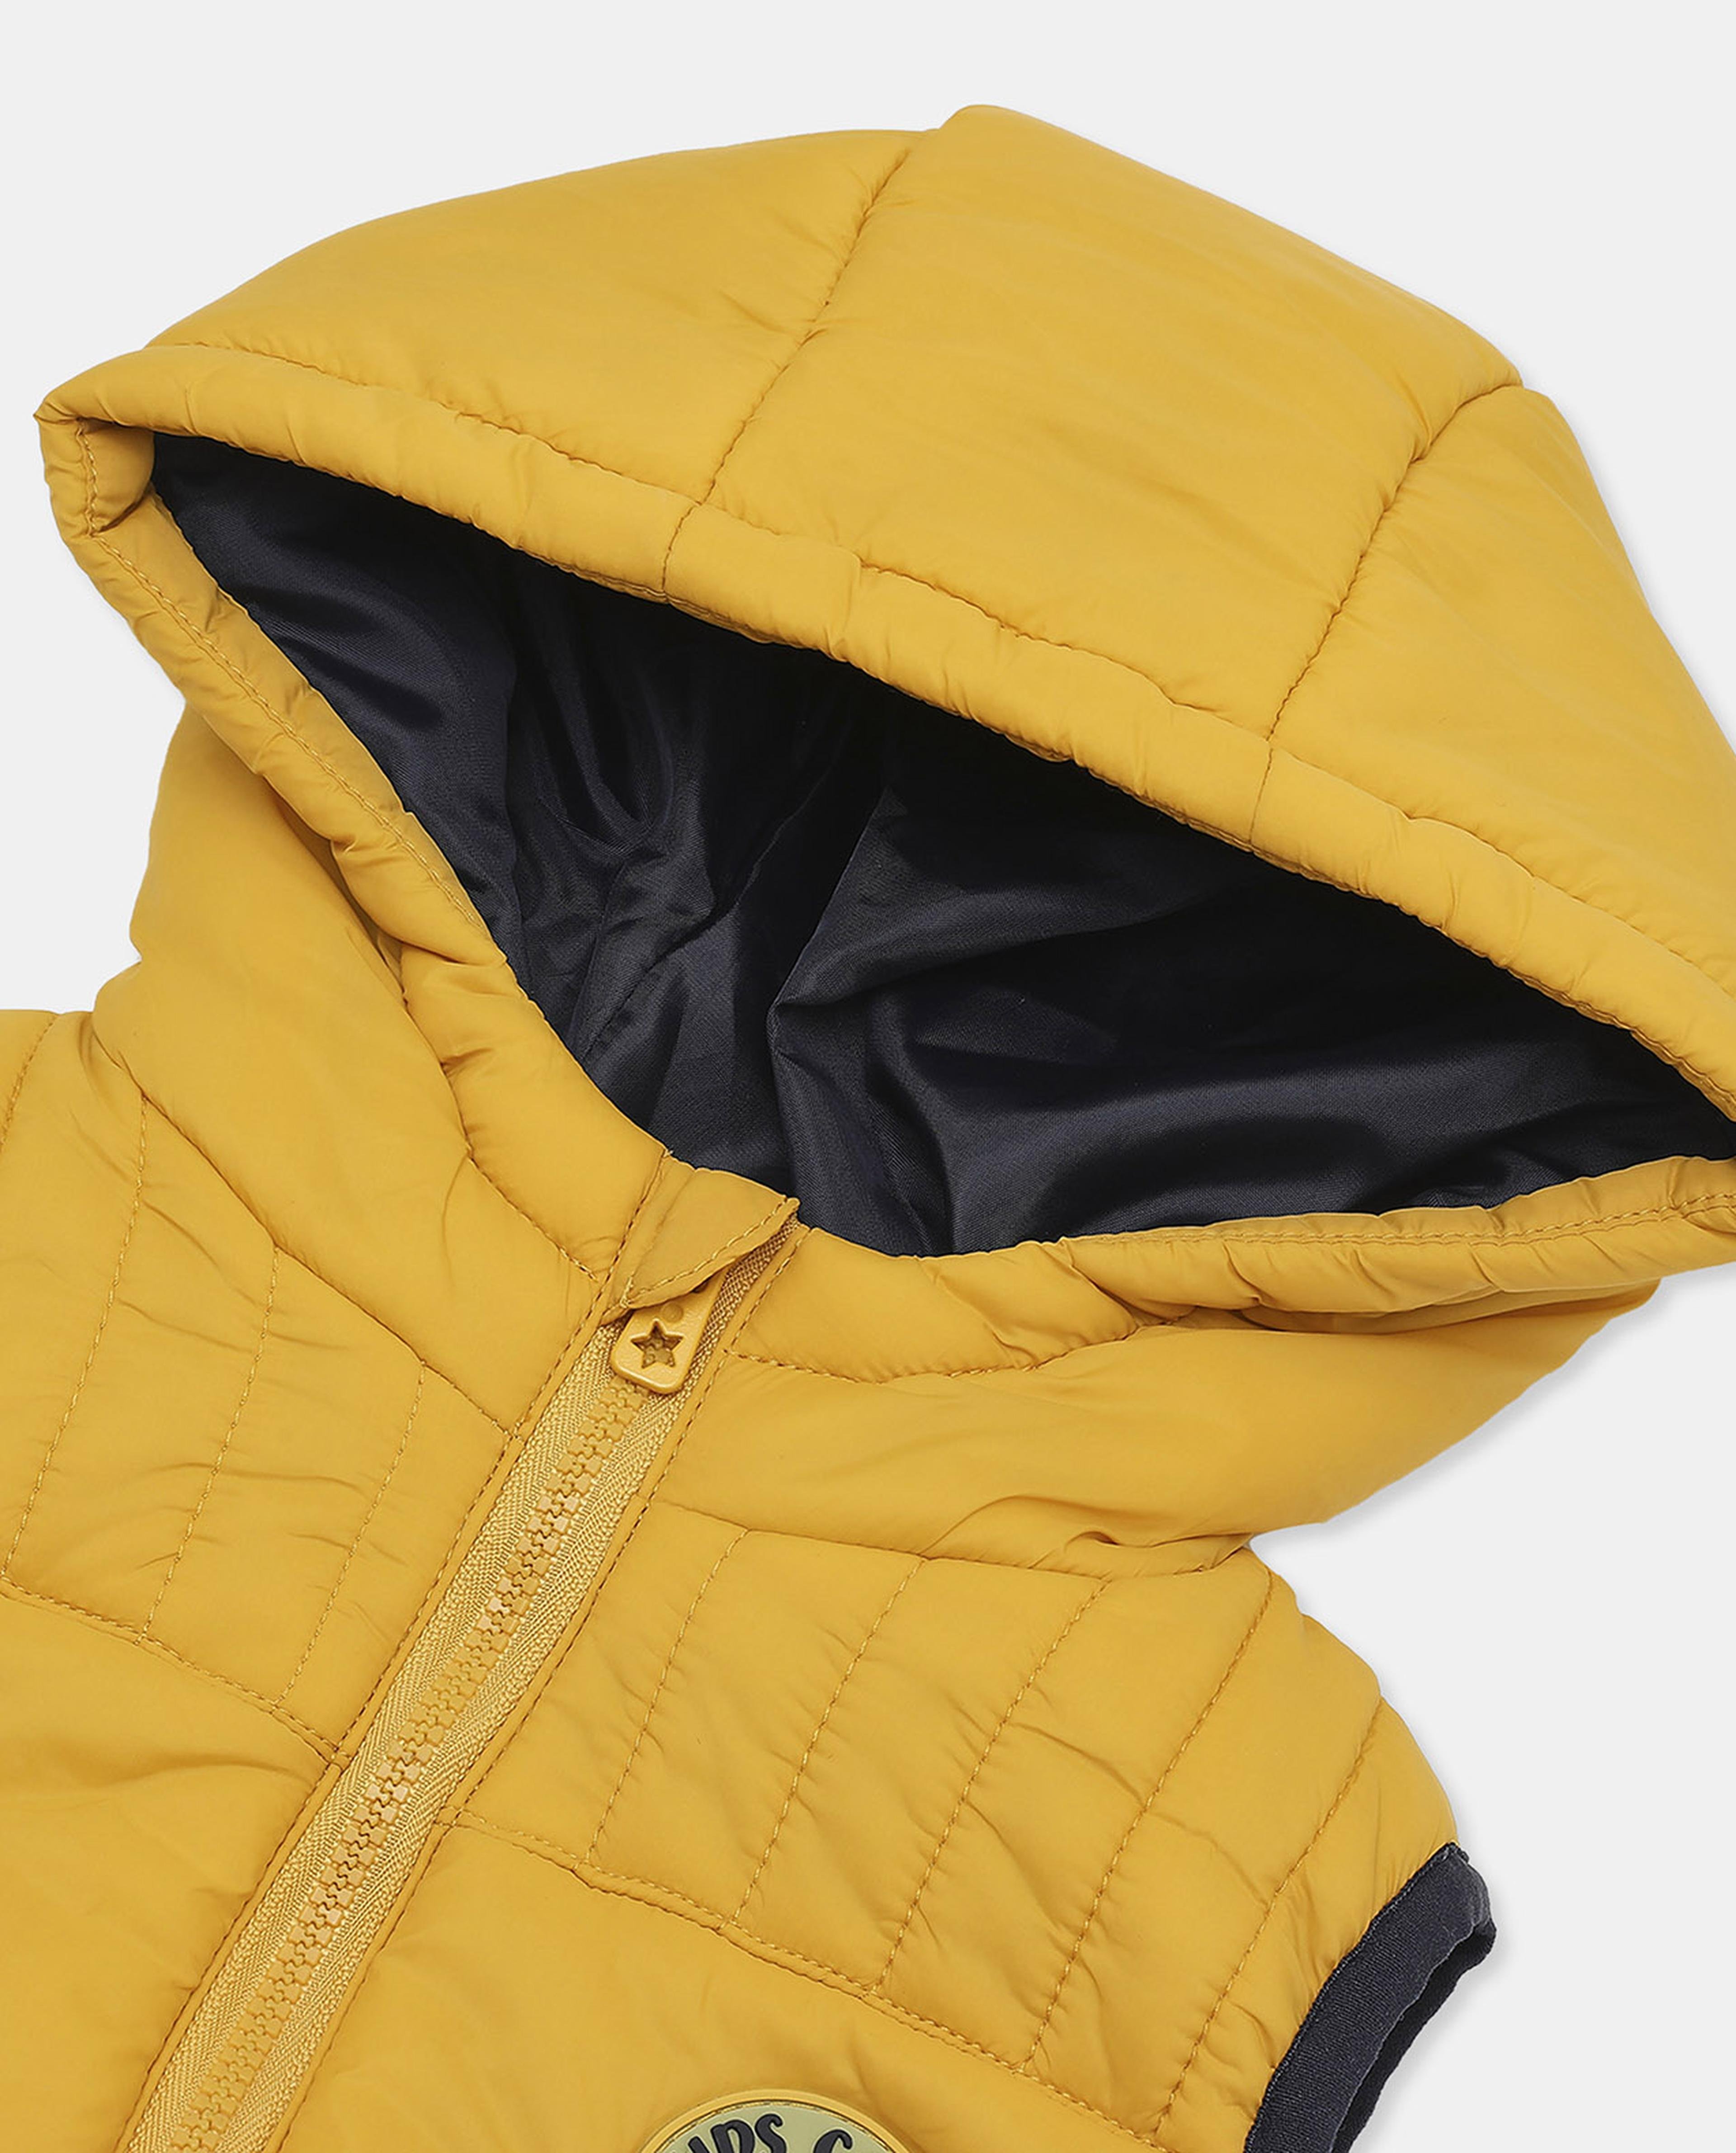 Solid Block Hooded Puffer Vest Jacket with Zippered Closure